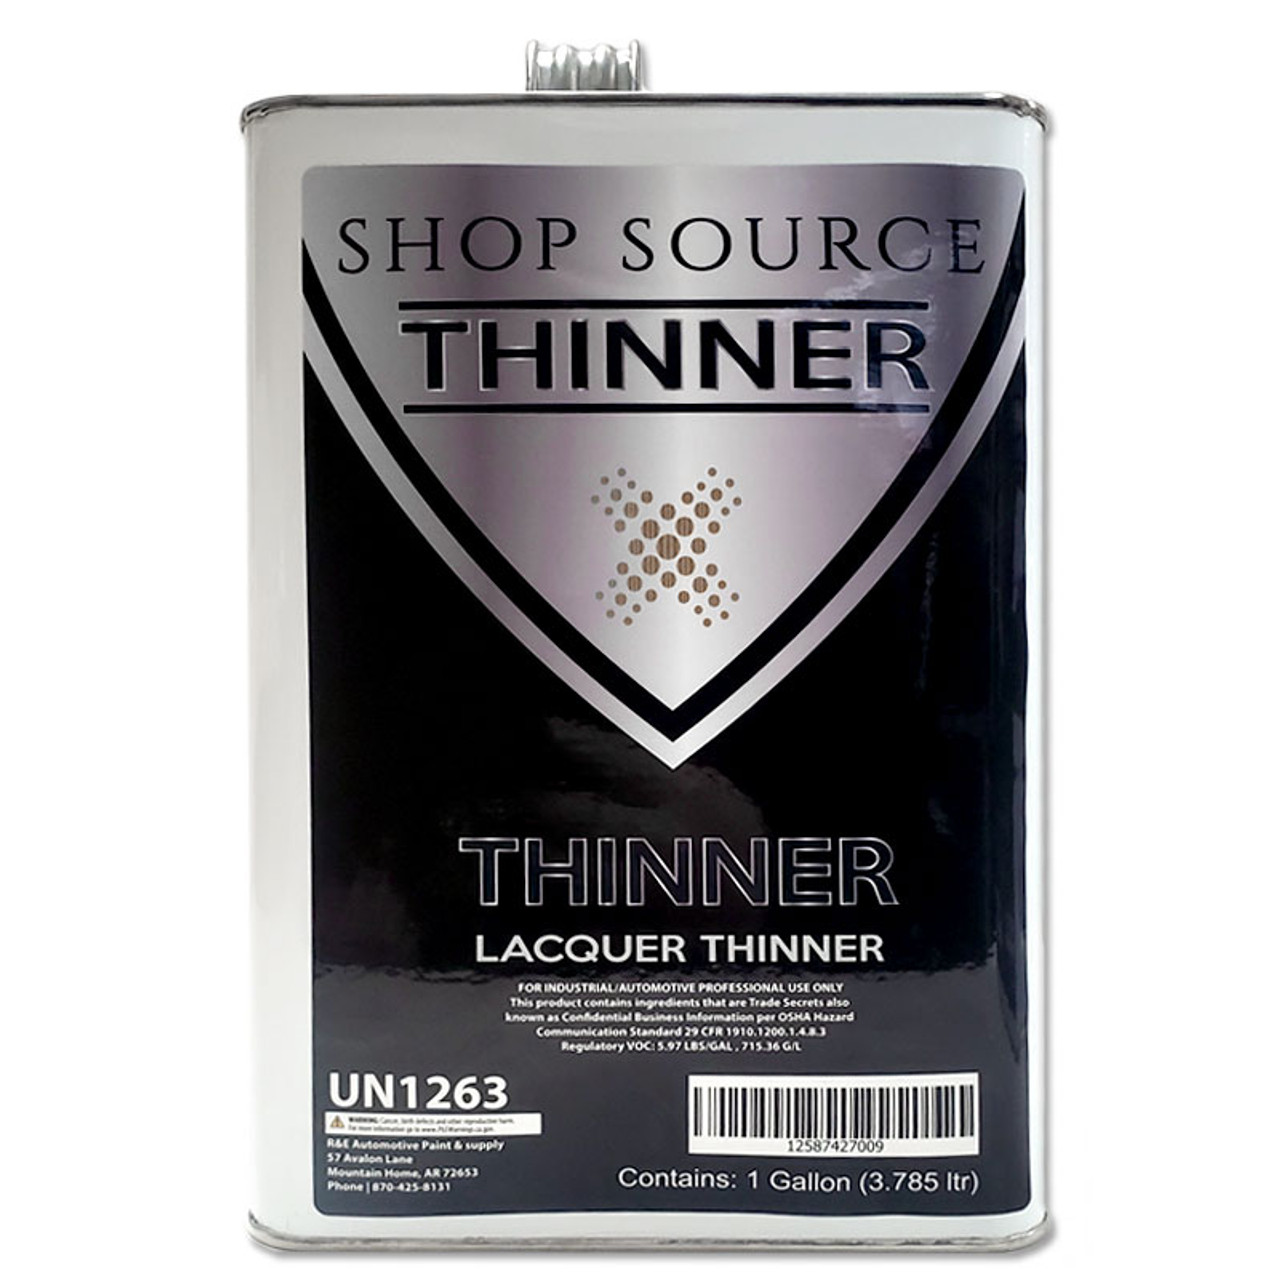 Paint Thinner Industrial